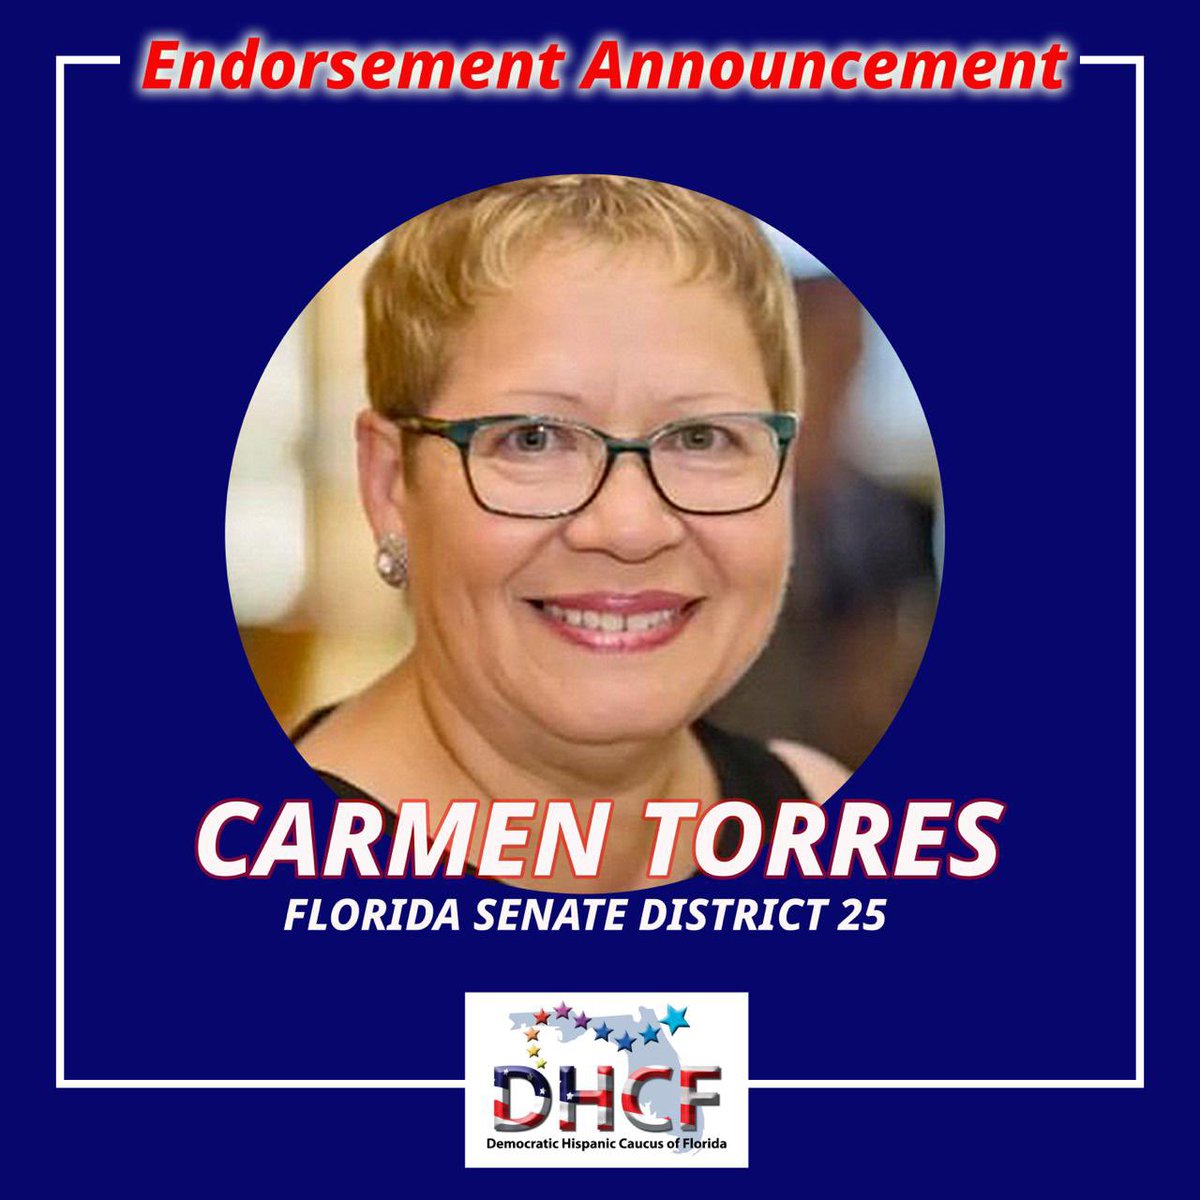 We proudly endorse Carmen Torres @CarmenforFL, running for Florida Senate District 25. She has dedicated over 29 years to building relationships, empowering voters, and defending democracy. Please visit her website to learn more👇🏻 carmentorresforflorida.com